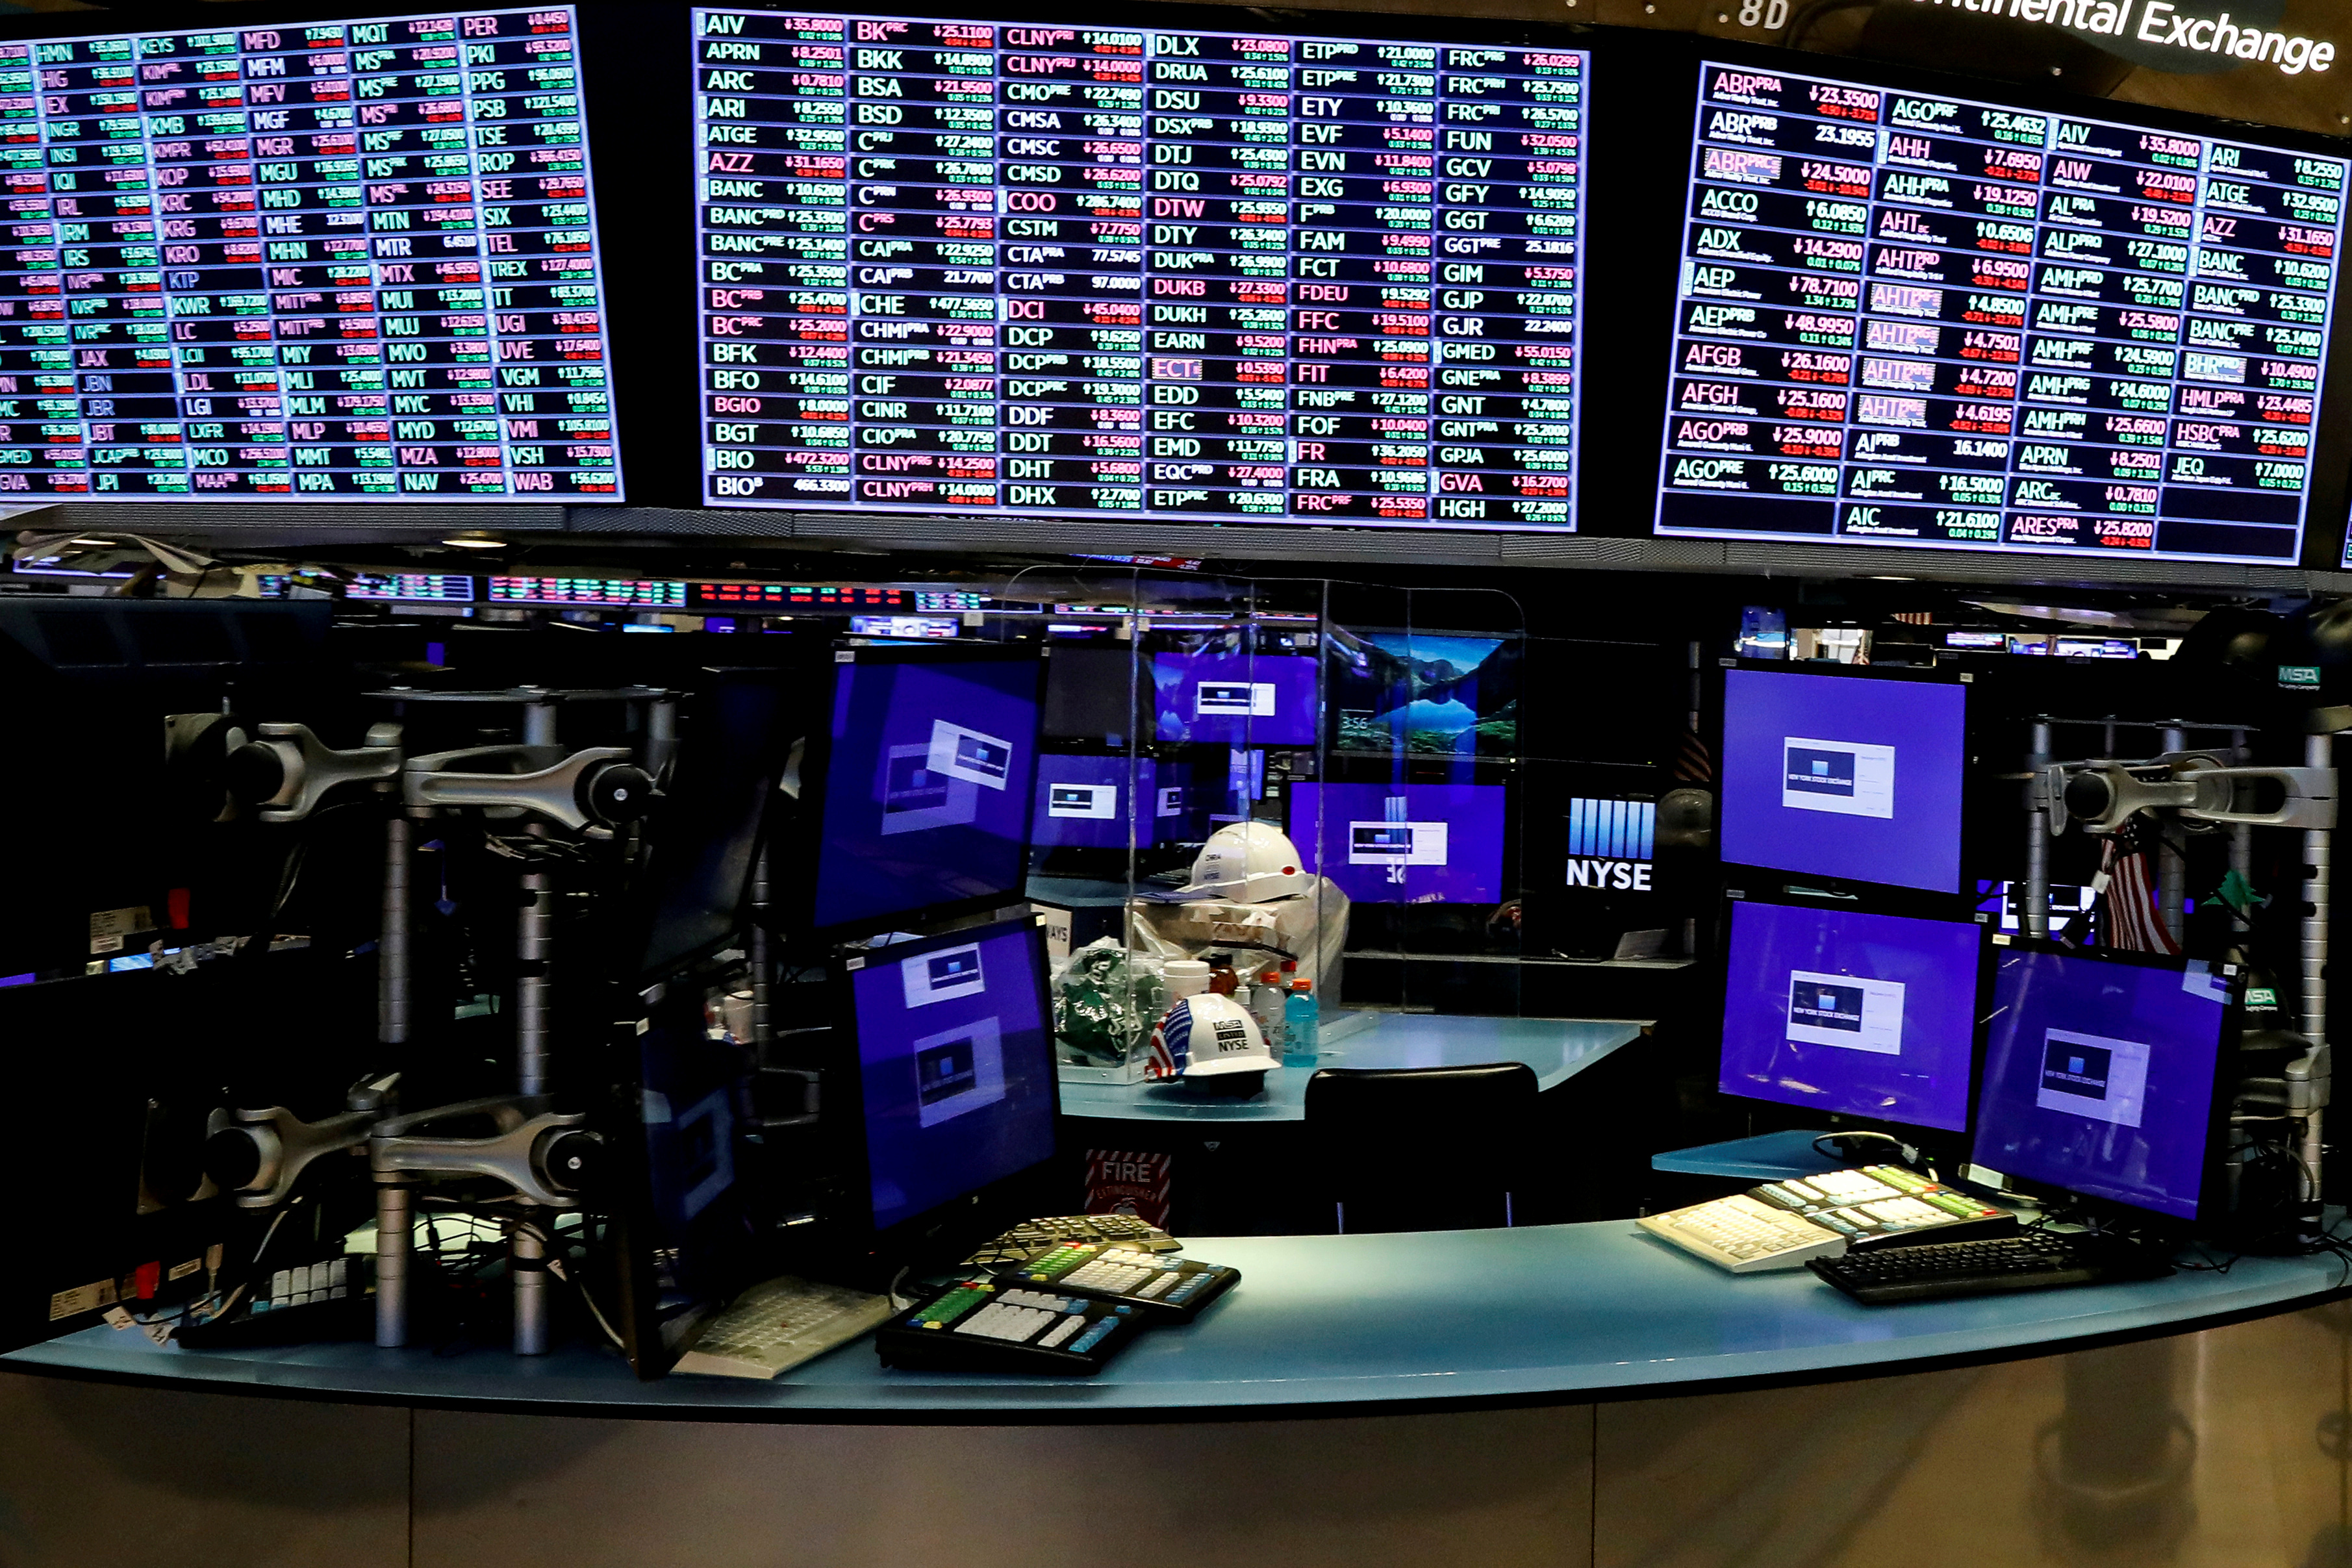 Dividers are seen inside a trading post on the trading floor at the NYSE